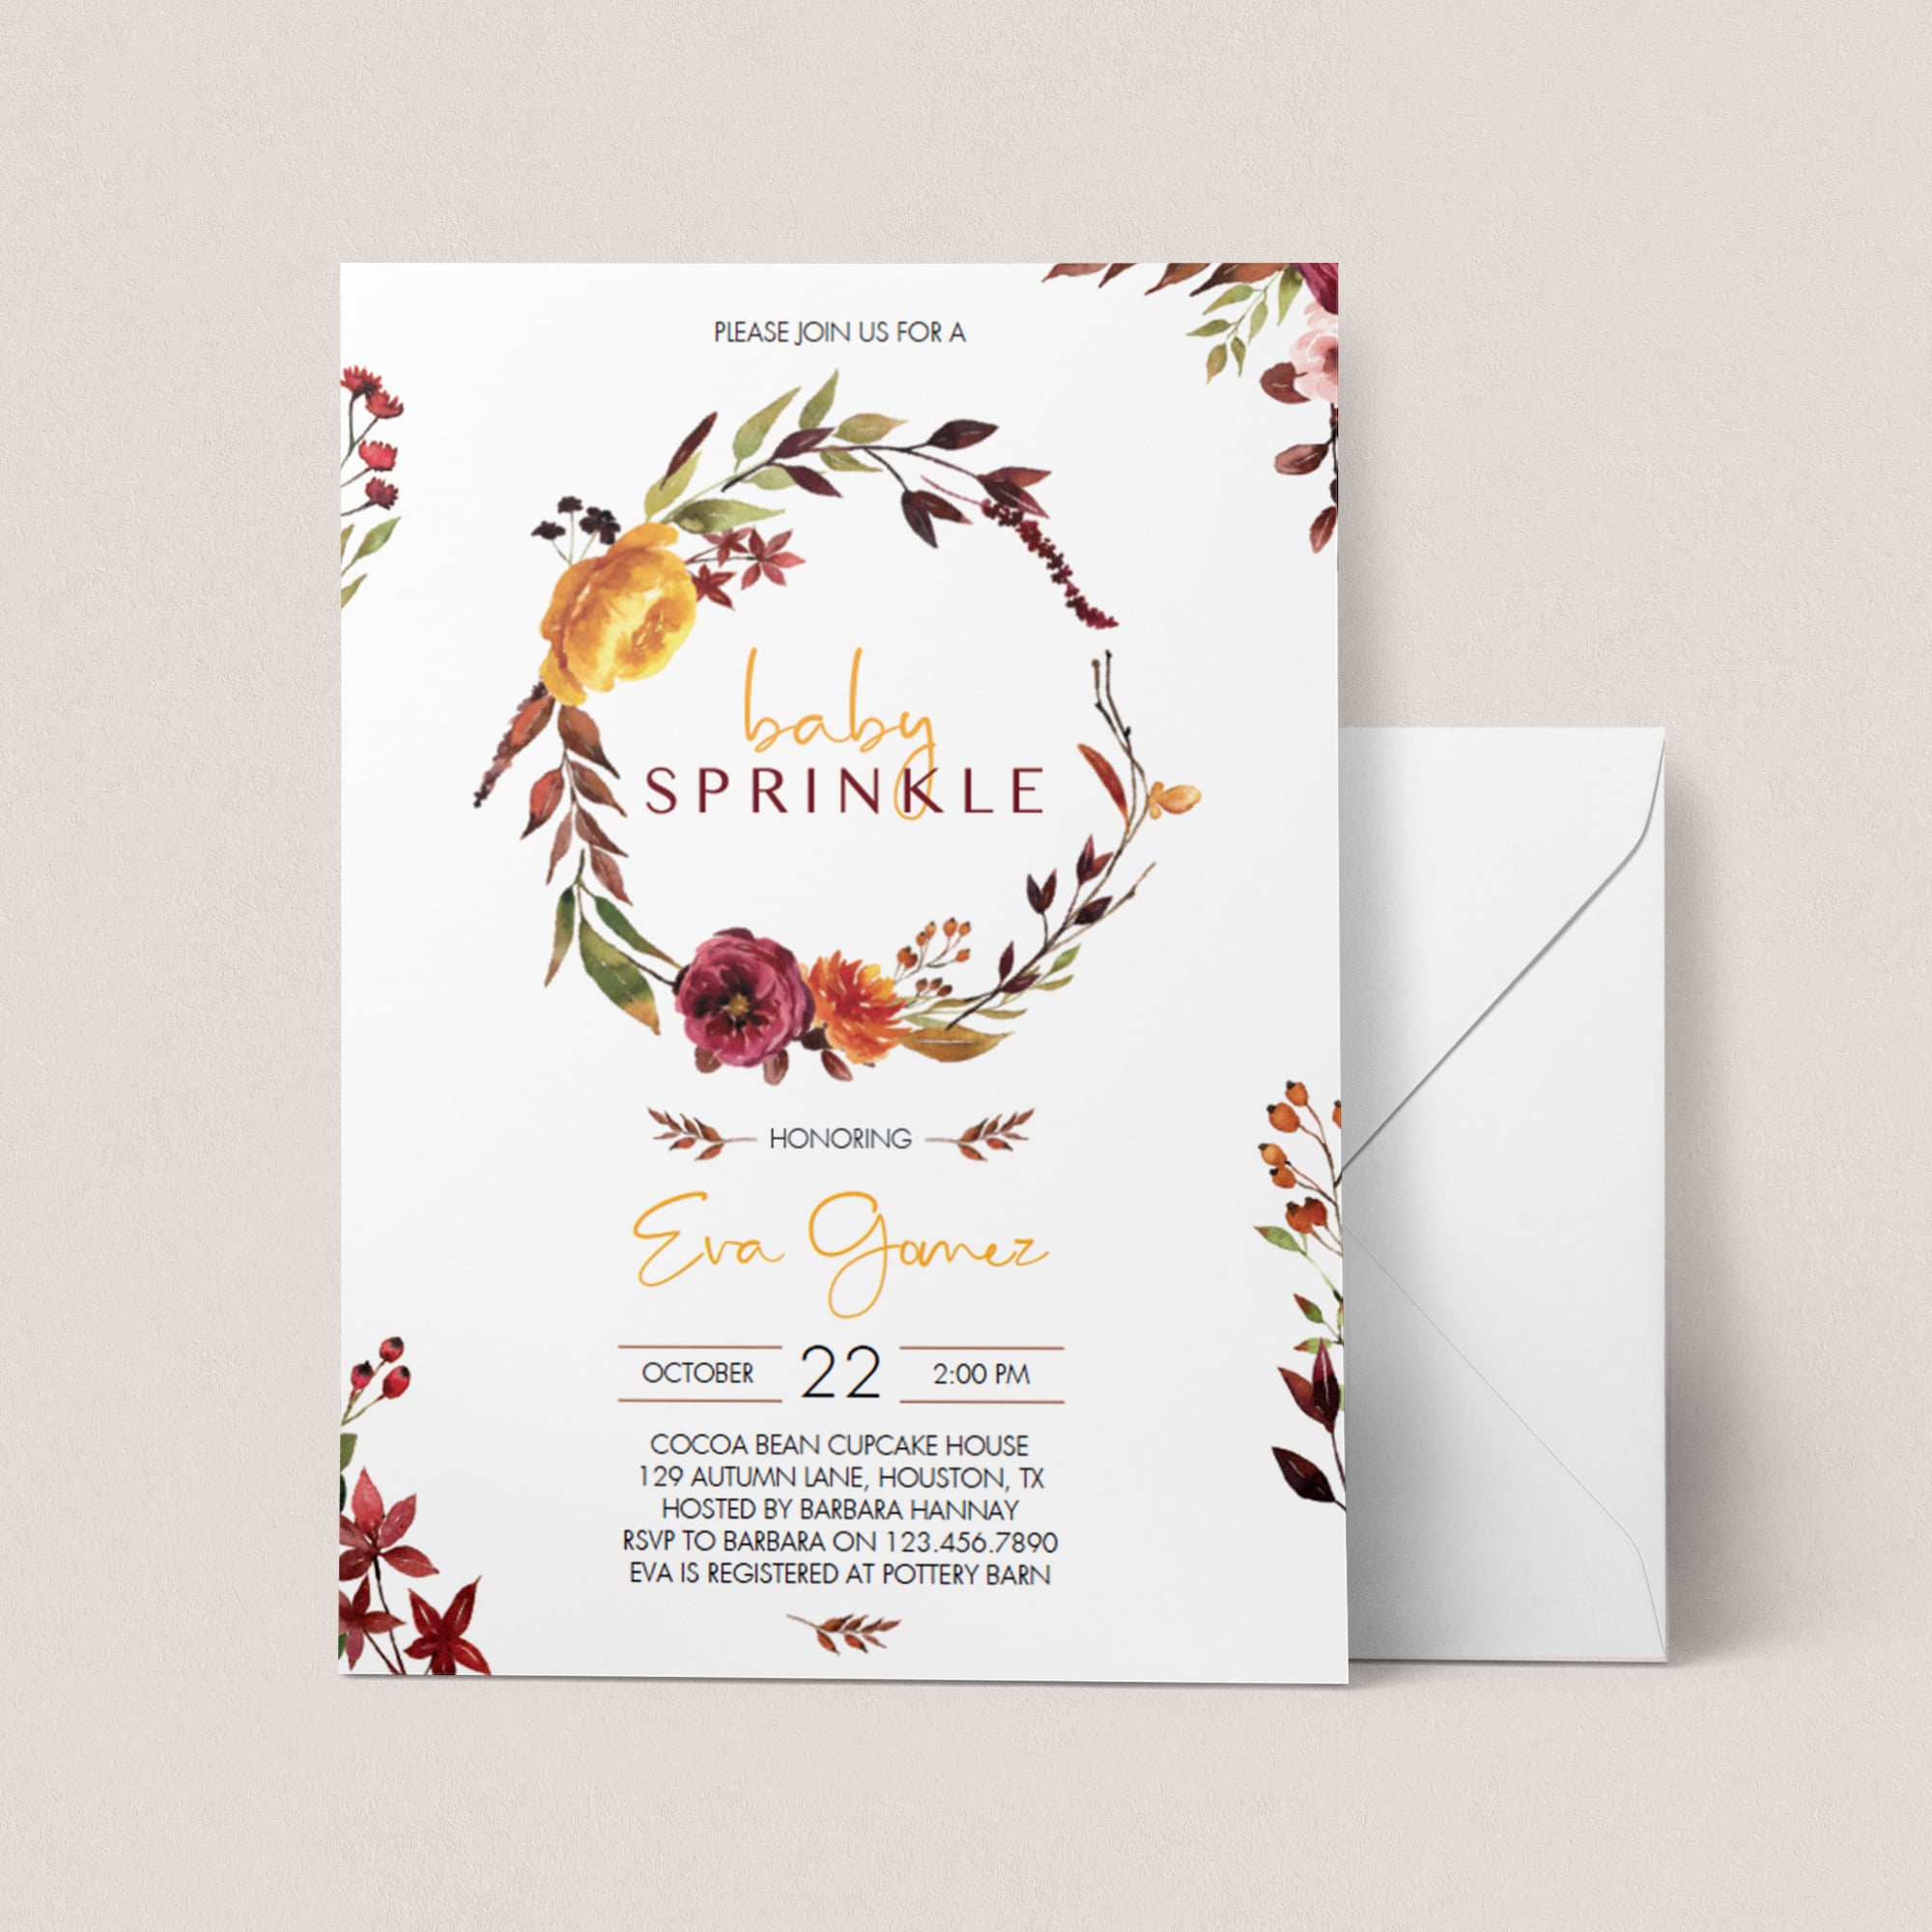 Autumn baby sprinkle invitation template by LittleSizzle